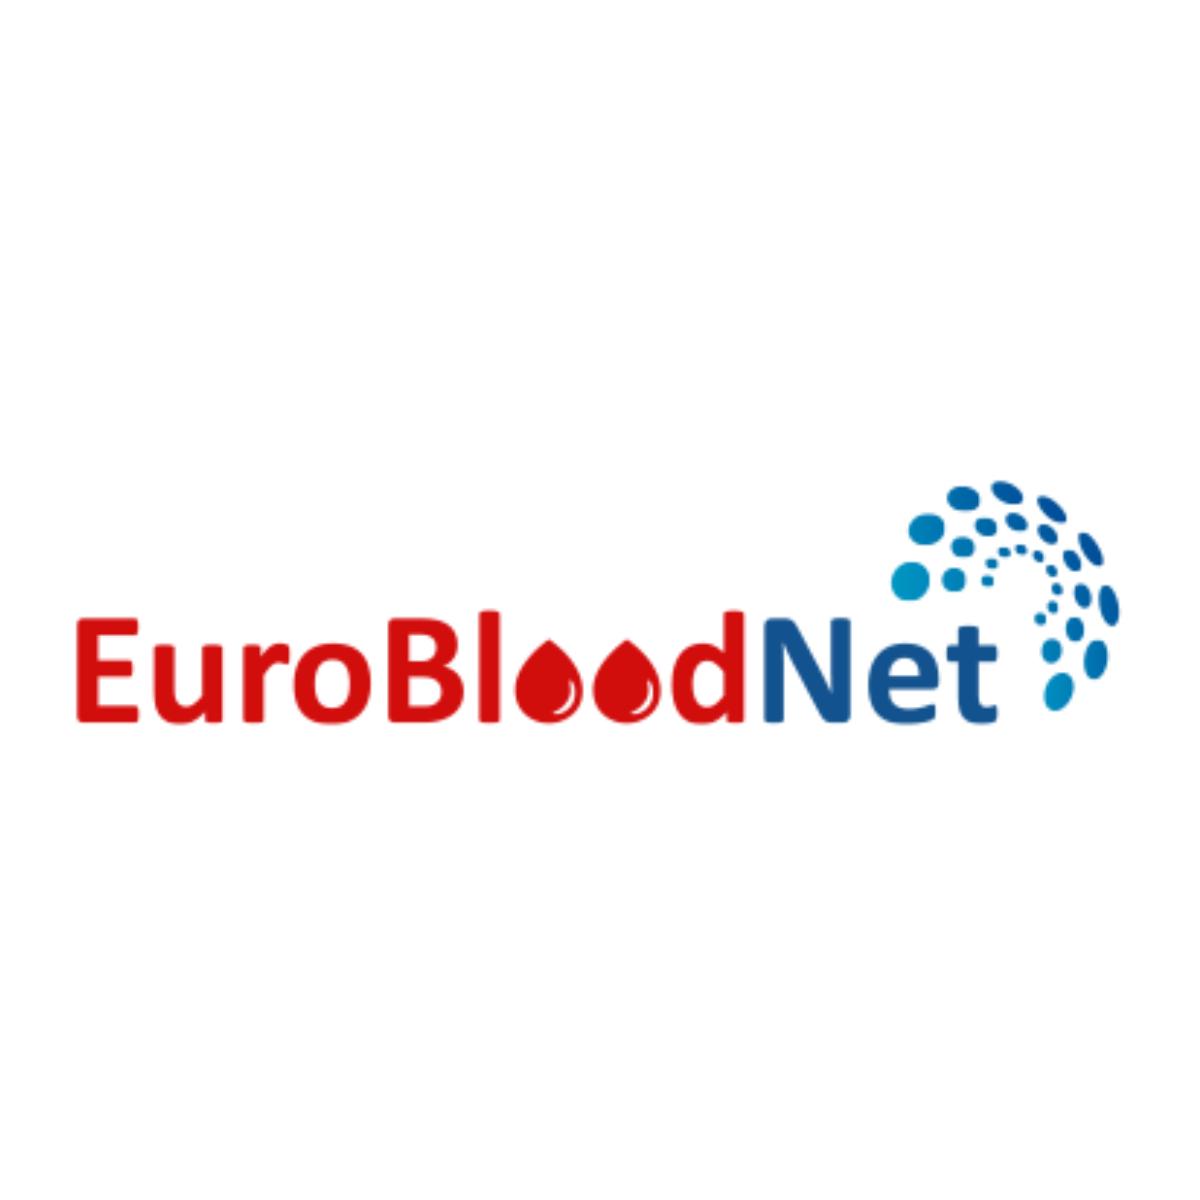 Clinical Practice Guidelines and other Clinical Decision Making Tools | Best practices | EuroBloodNet